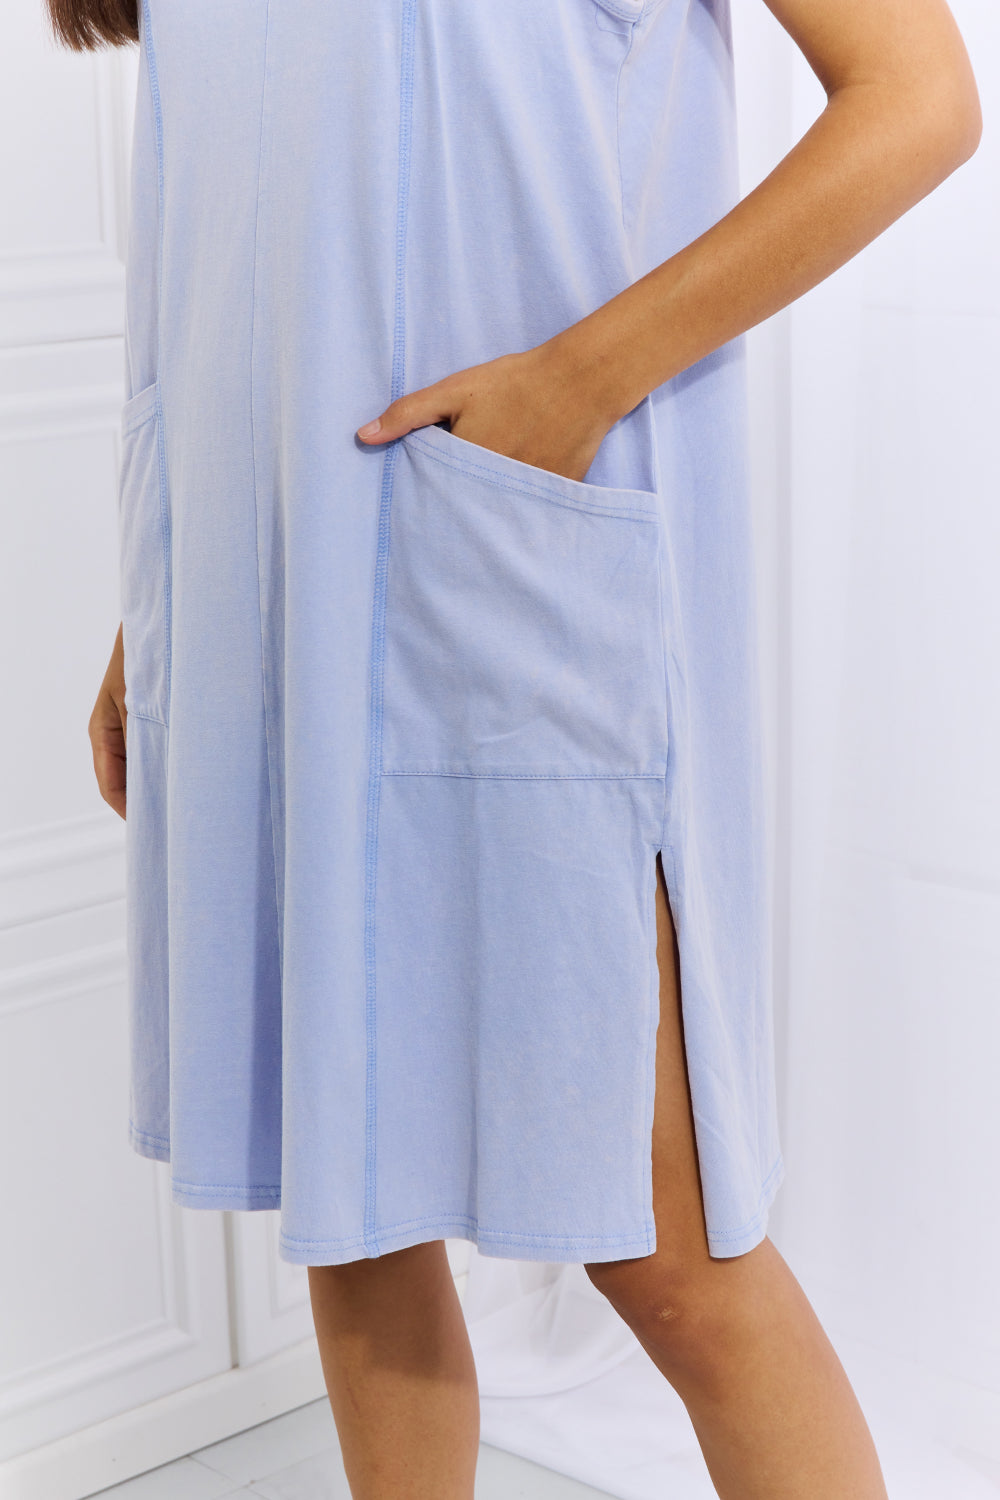 HEYSON Dyed Sleeveless Casual Dress in Periwinkle